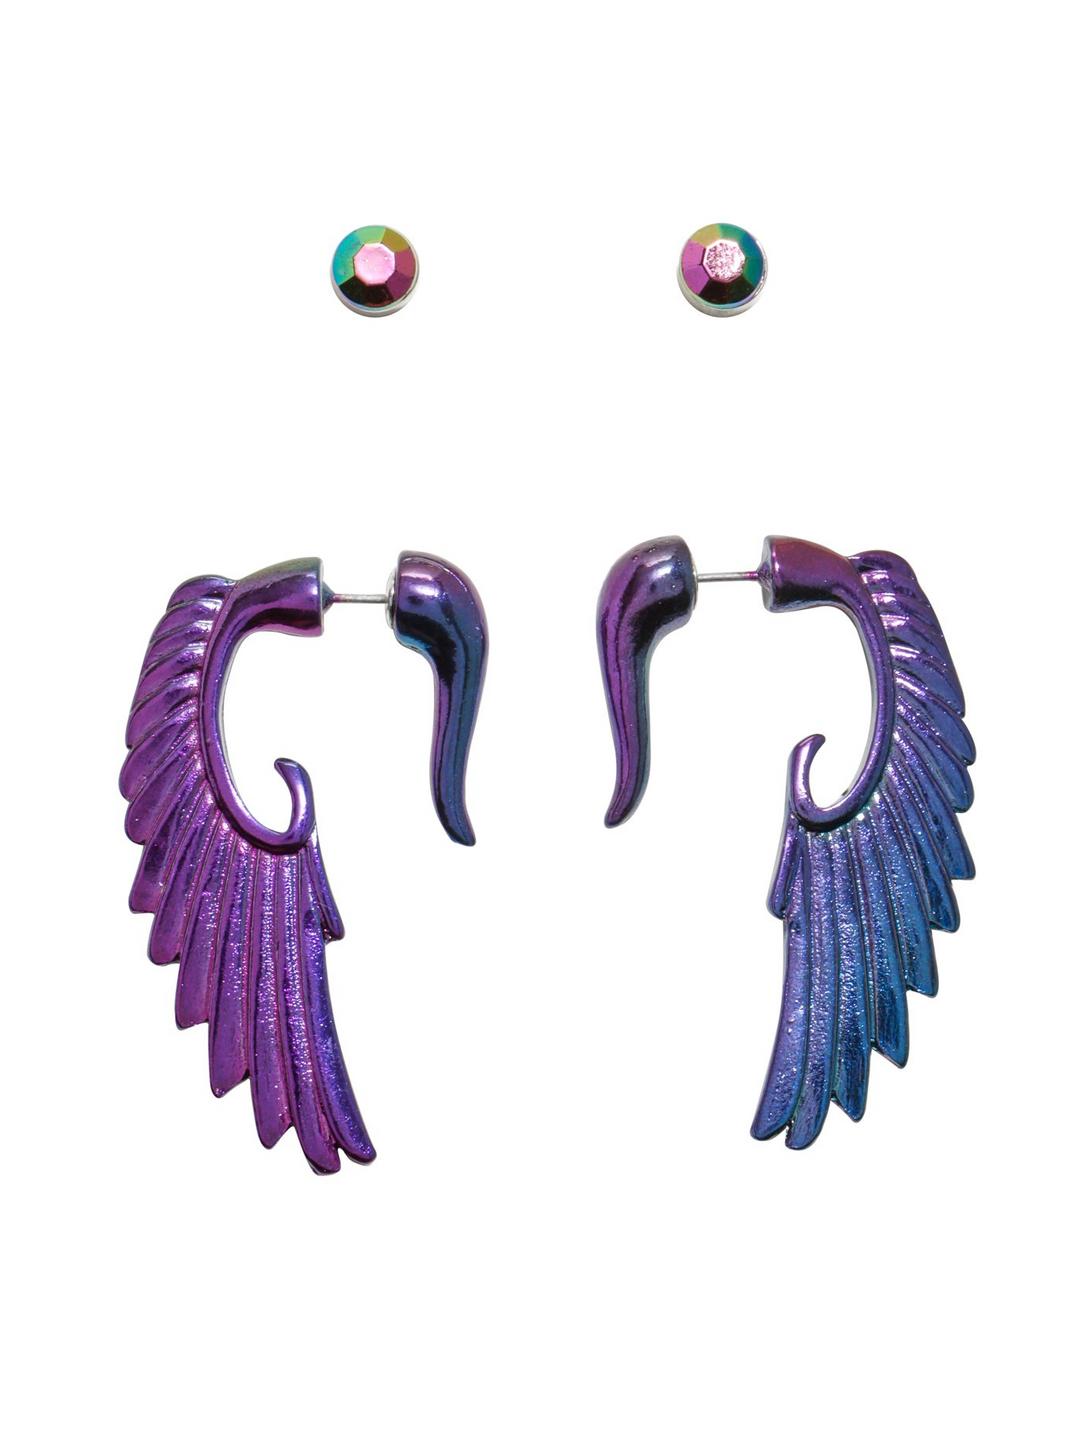 Blackheart Anodized Wing Tunnel Earring Set, , hi-res